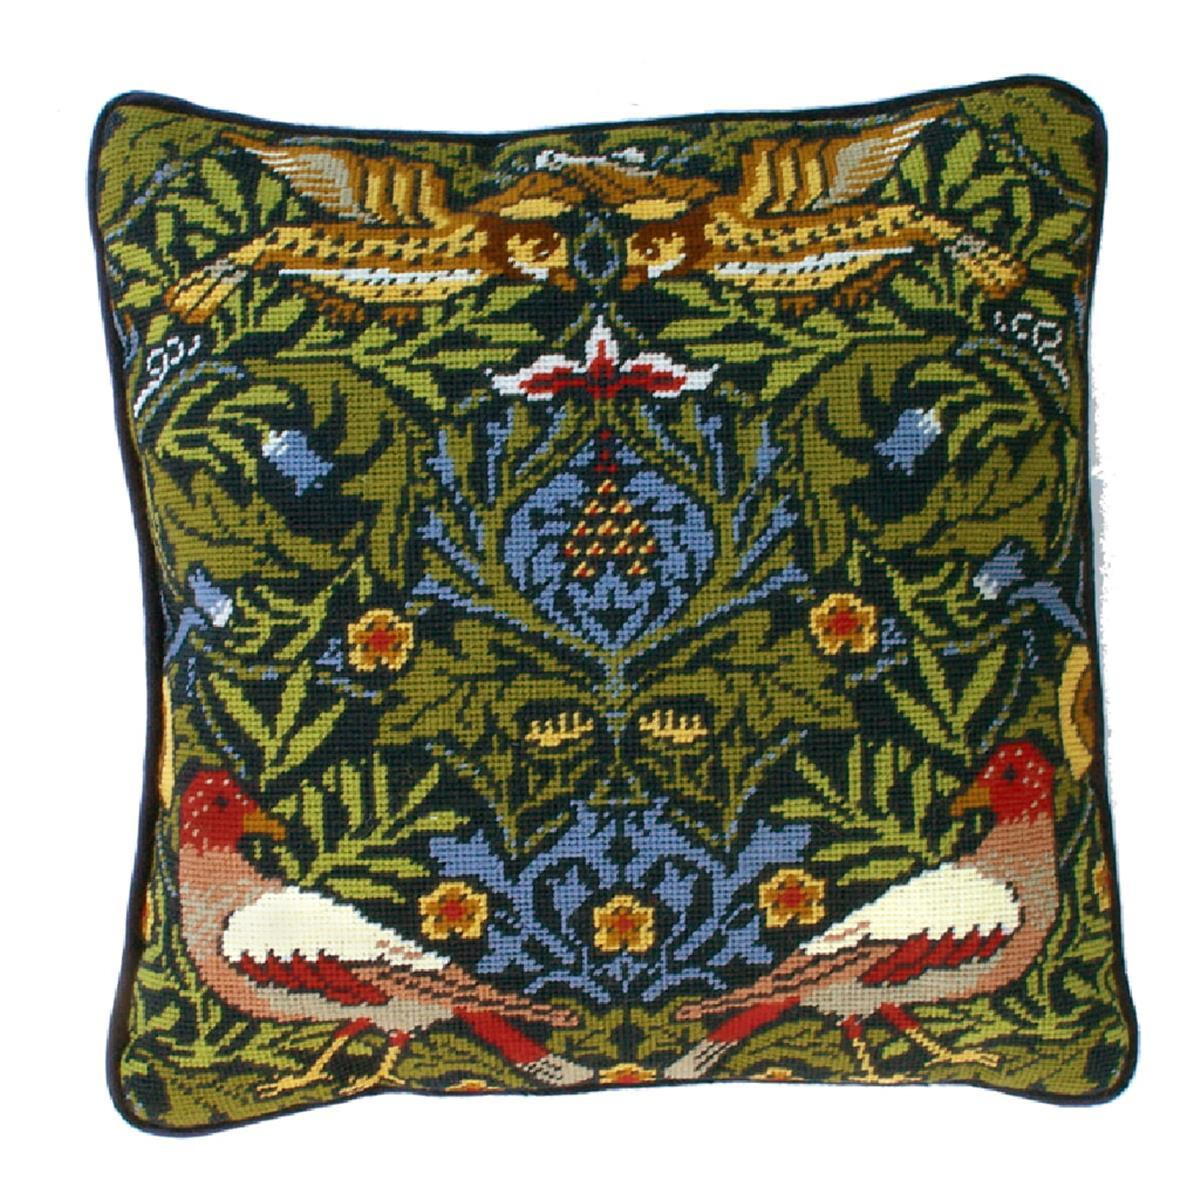 A square decorative cushion with an intricate embroidered...